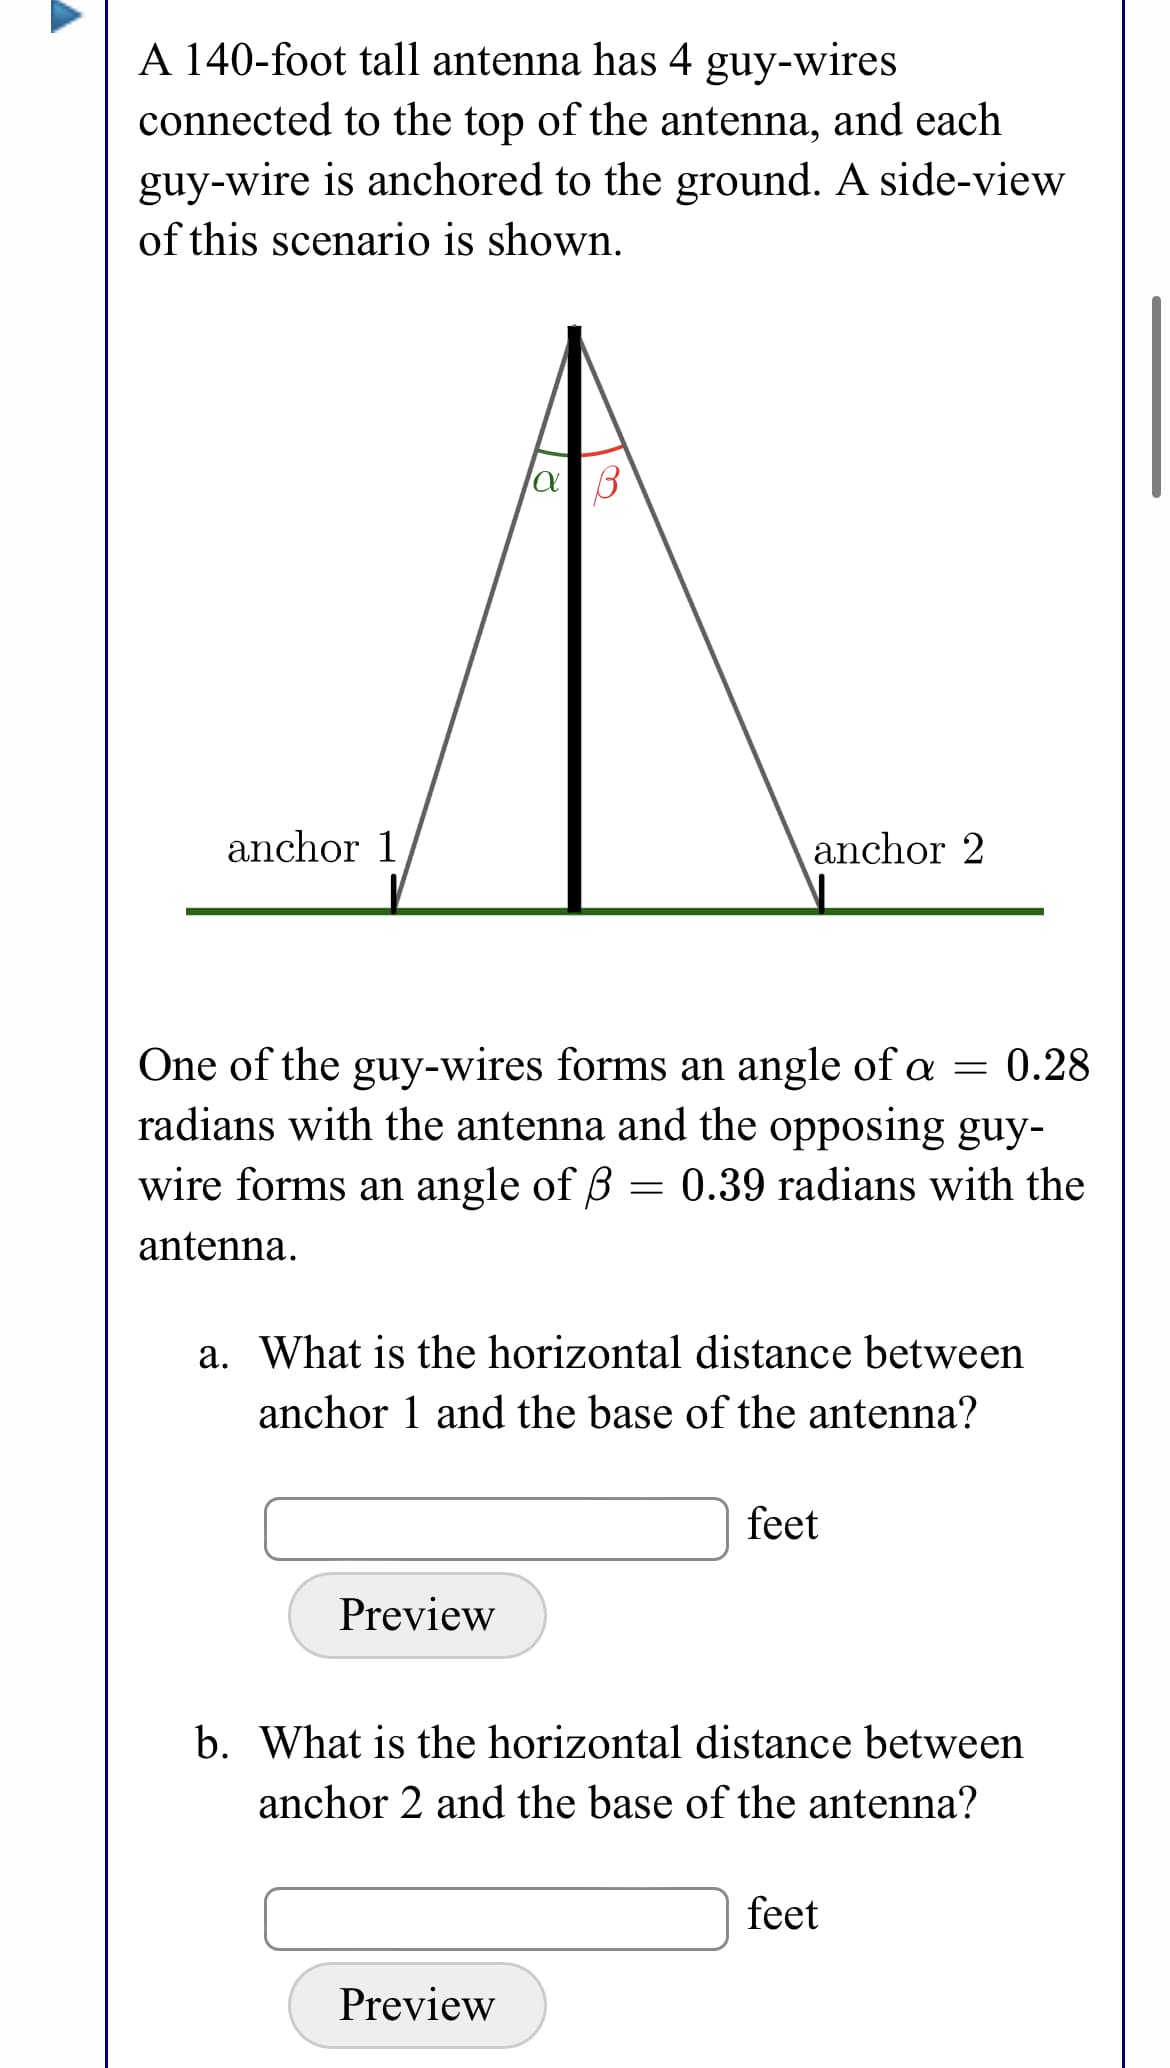 A 140-foot tall antenna has 4 guy-wires
connected to the top of the antenna, and each
guy-wire is anchored to the ground. A side-view
of this scenario is shown.
anchor 1
anchor 2
One of the guy-wires forms an angle of a = 0.28
radians with the antenna and the opposing guy-
wire forms an angle of B = 0.39 radians with the
antenna.
a. What is the horizontal distance between
anchor 1 and the base of the antenna?
feet
Preview
b. What is the horizontal distance between
anchor 2 and the base of the antenna?
feet
Preview
